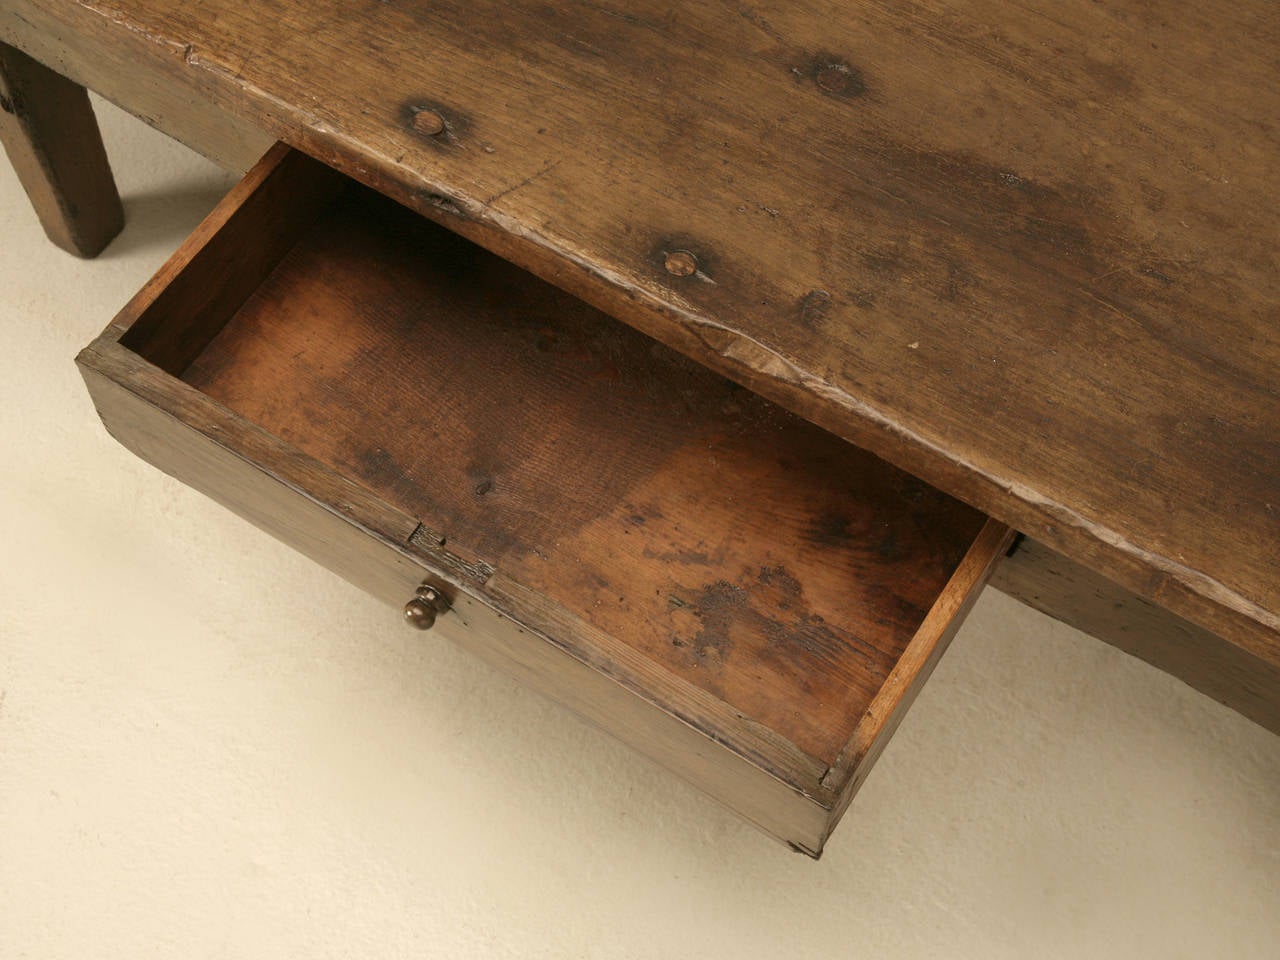 19th Century French Oak and Pine Cut Down Table with a Drawer and Wide Boards